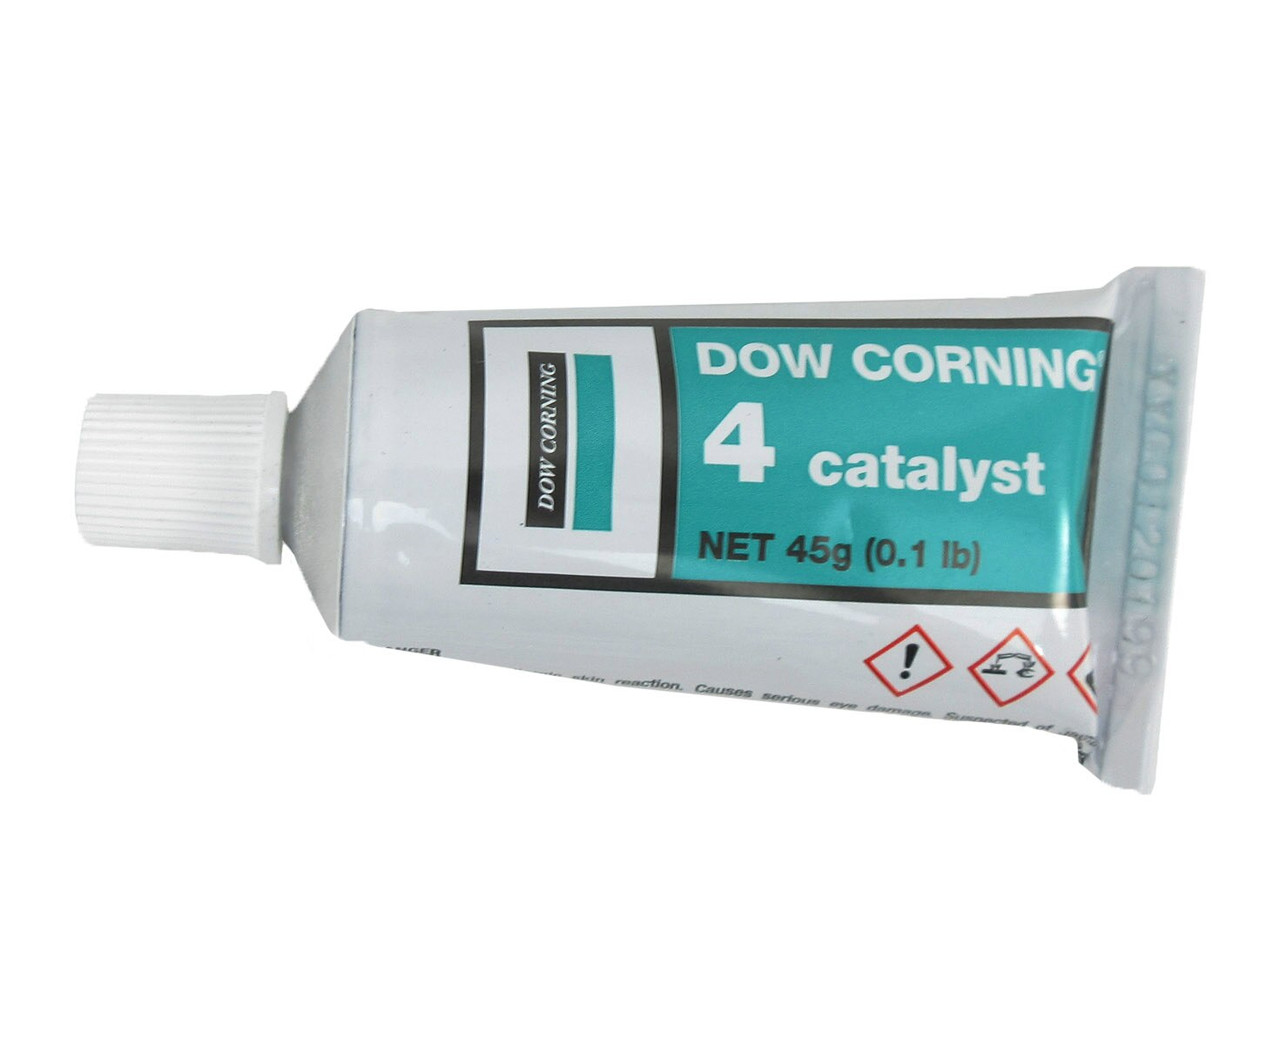 Corning 4 Catalyst Silicone Rubber Curing Agent - 45 Gram Tube at SkyGeek.com